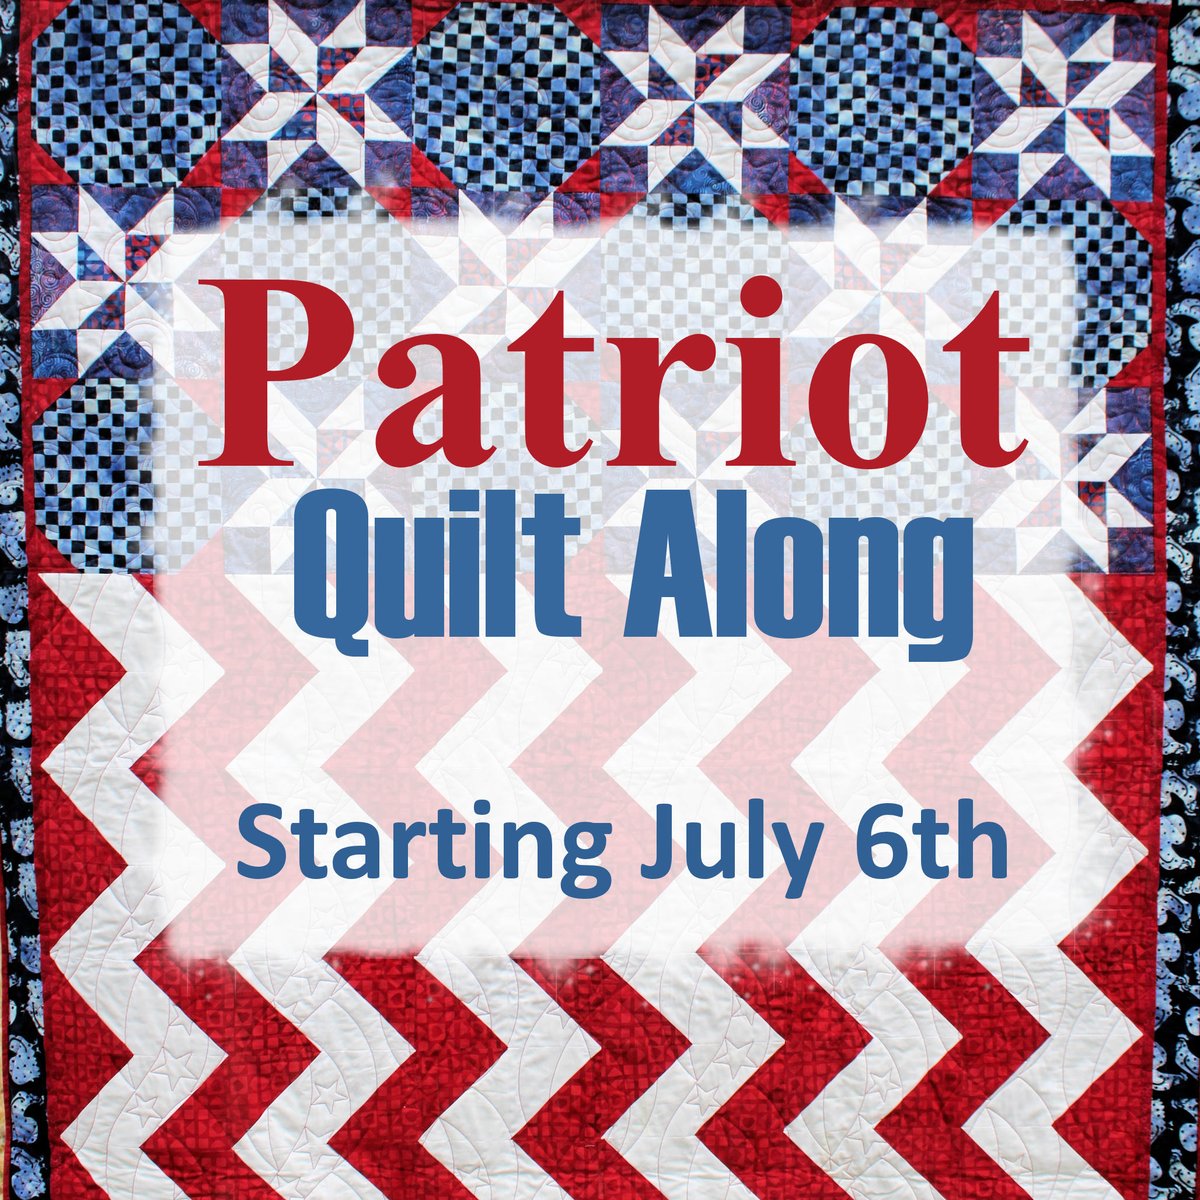 I'm having a quilt along with Patriot, starting July 6th! Patriot is perfect for a Quilt of Valor and easy enough for a beginner. 

Sign up below and I'll send you a coupon code worth 30% off my Patriot PDF pattern.

mailchi.mp/inquiringquilt…

#inquiringquilter #patriotquilt